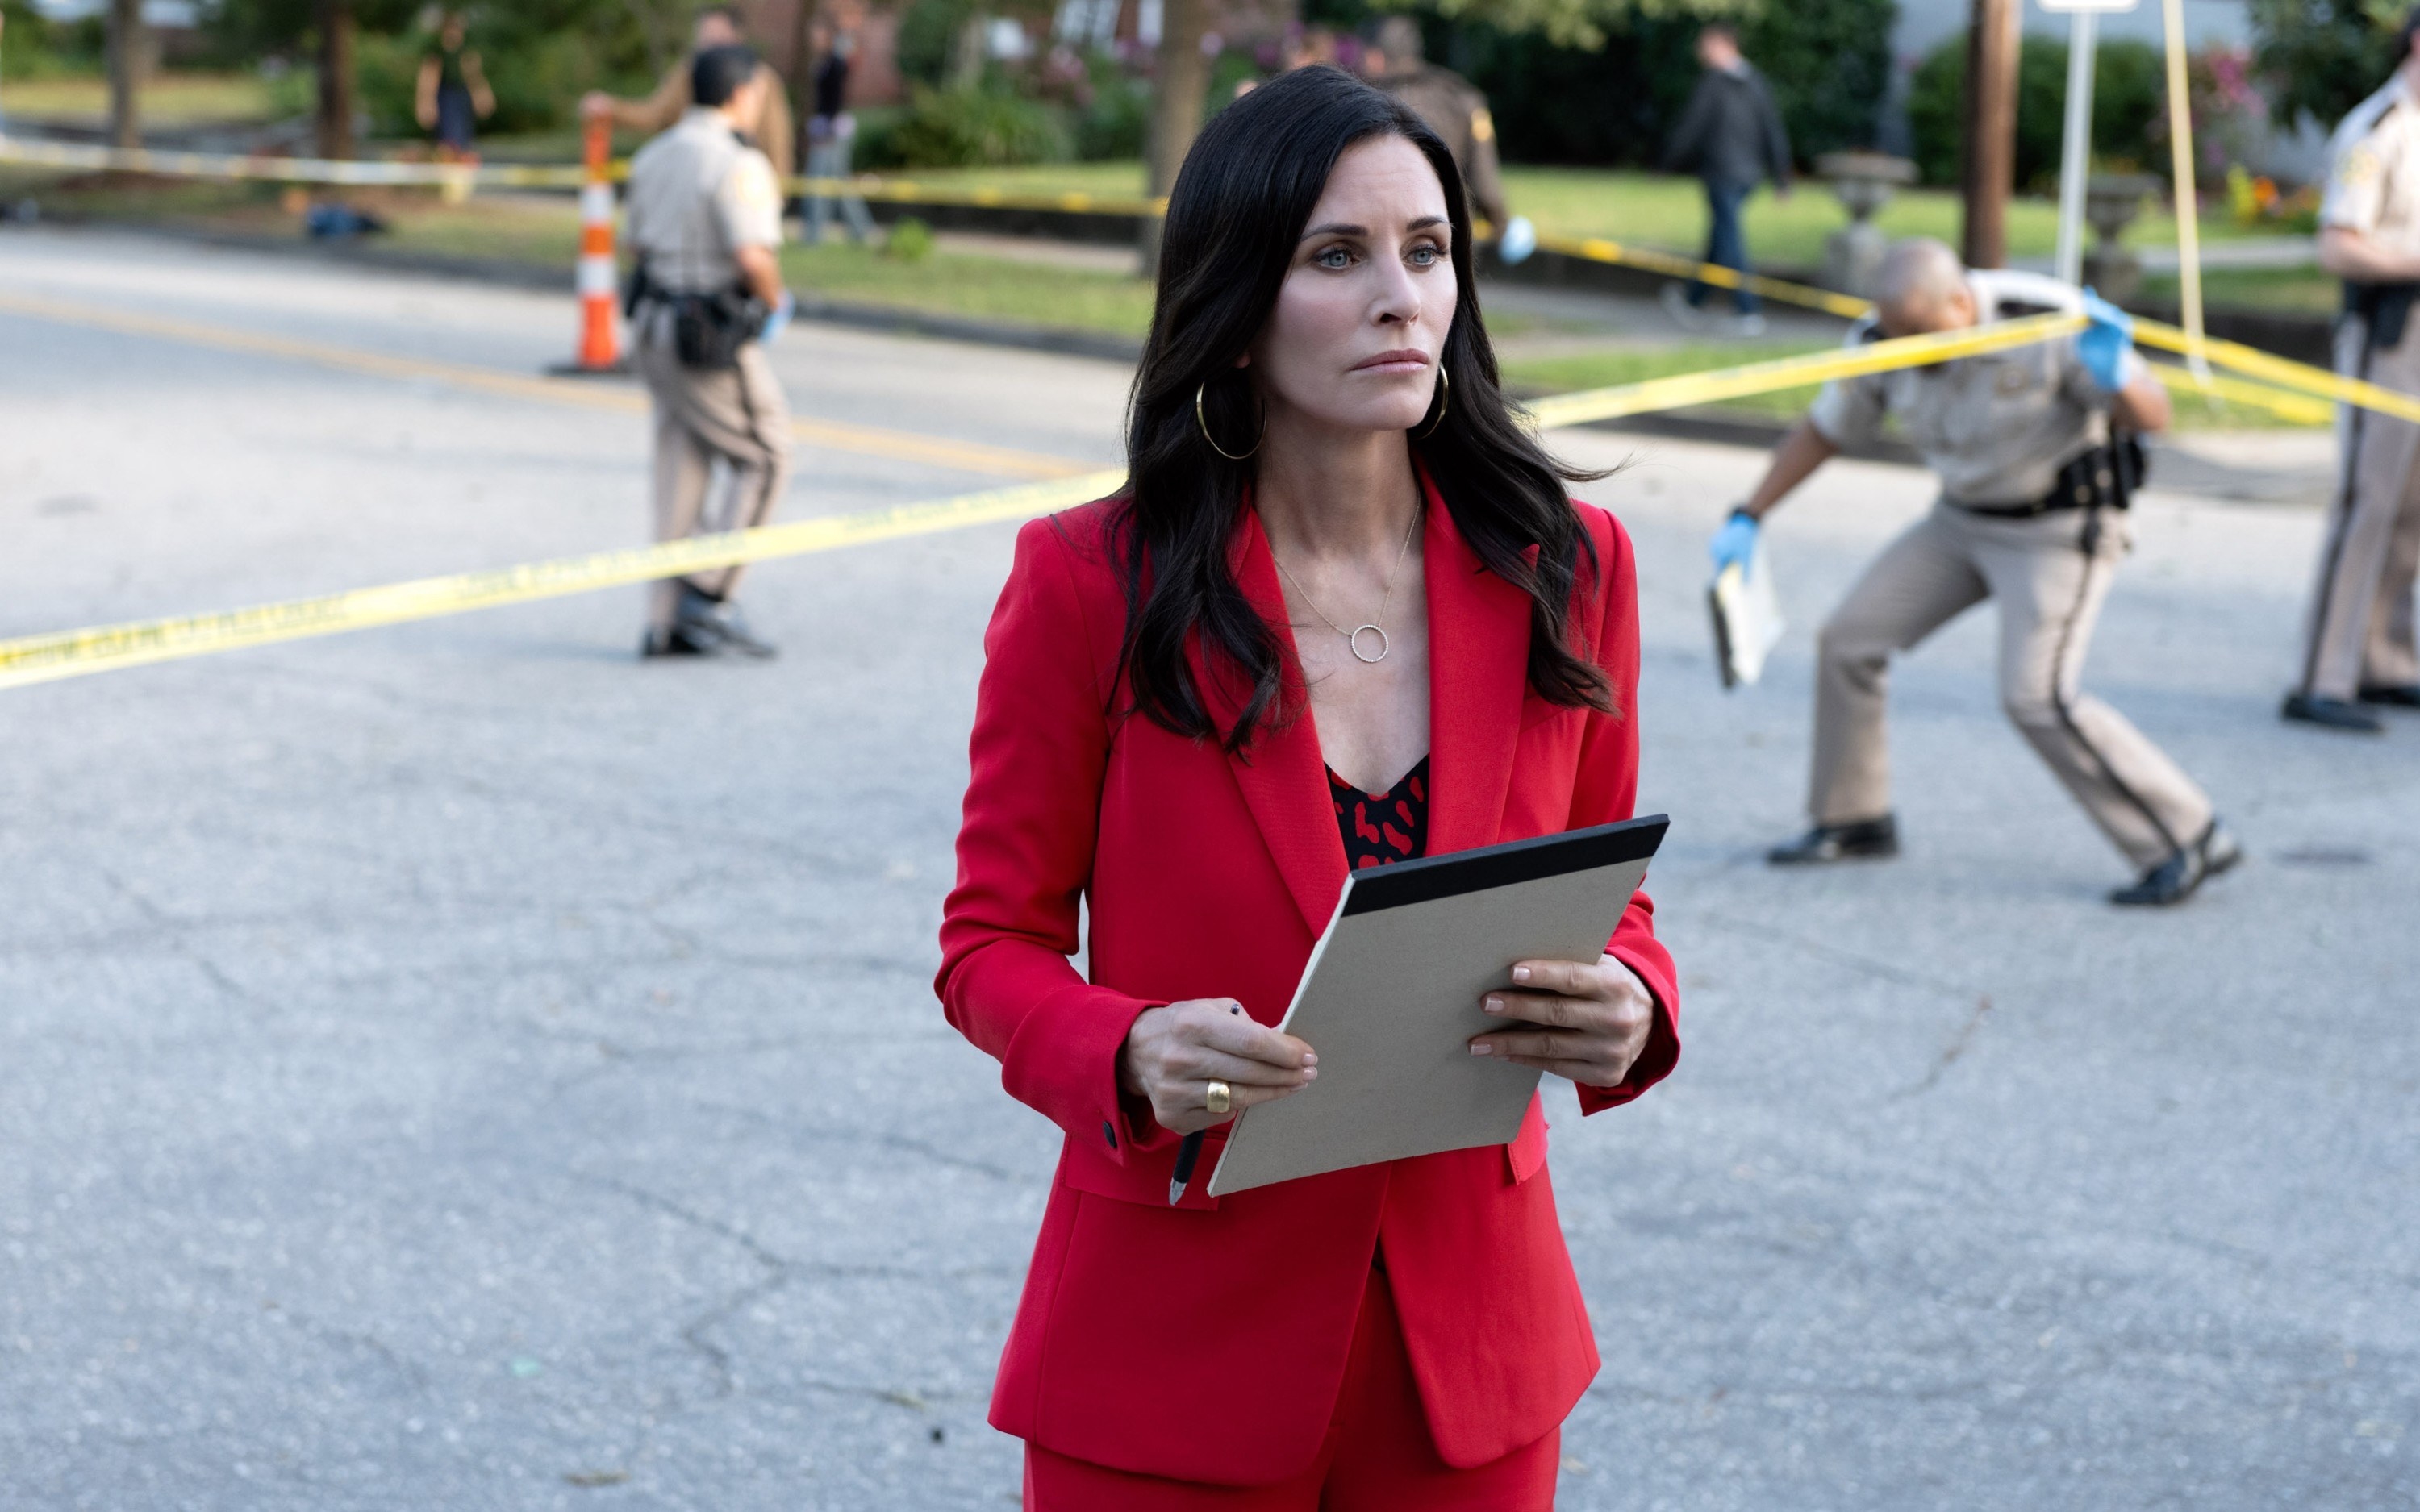 Gale Weathers reporting for duty in a power suit outside a cordoned-off crime scene and holding a large notepad